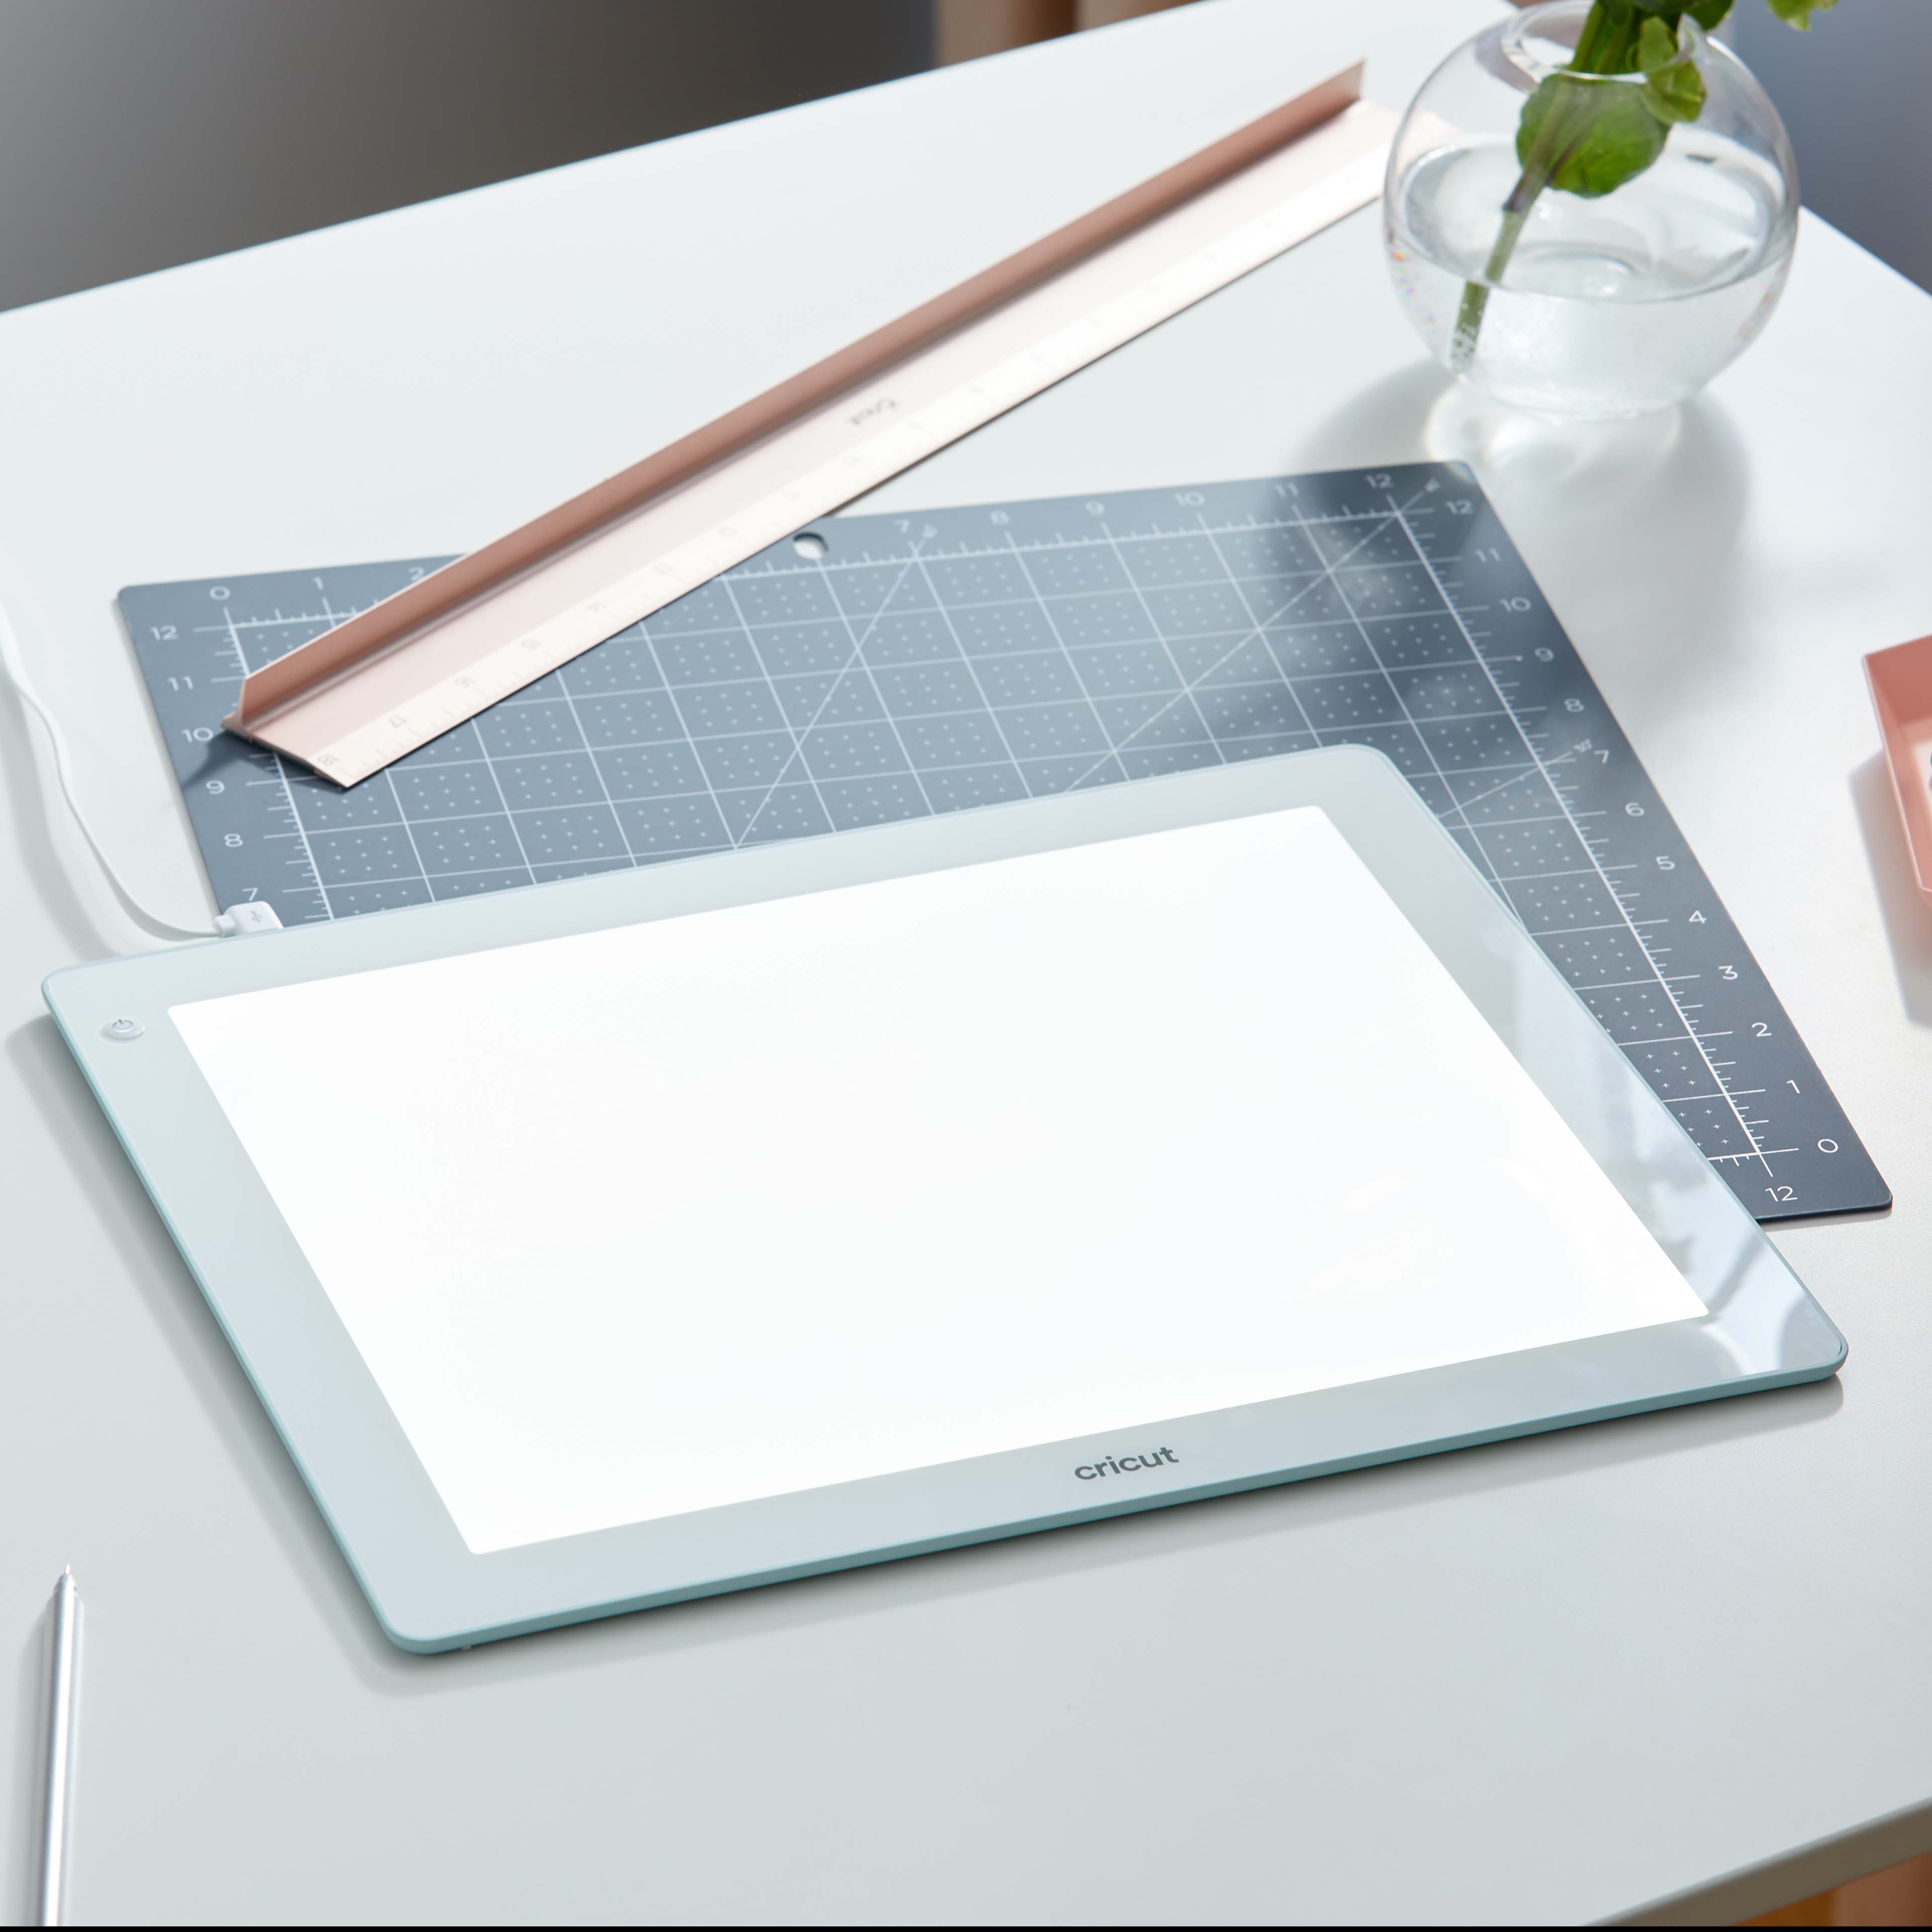 Illuminate your craft projects with 25% off the Cricut BrightPad